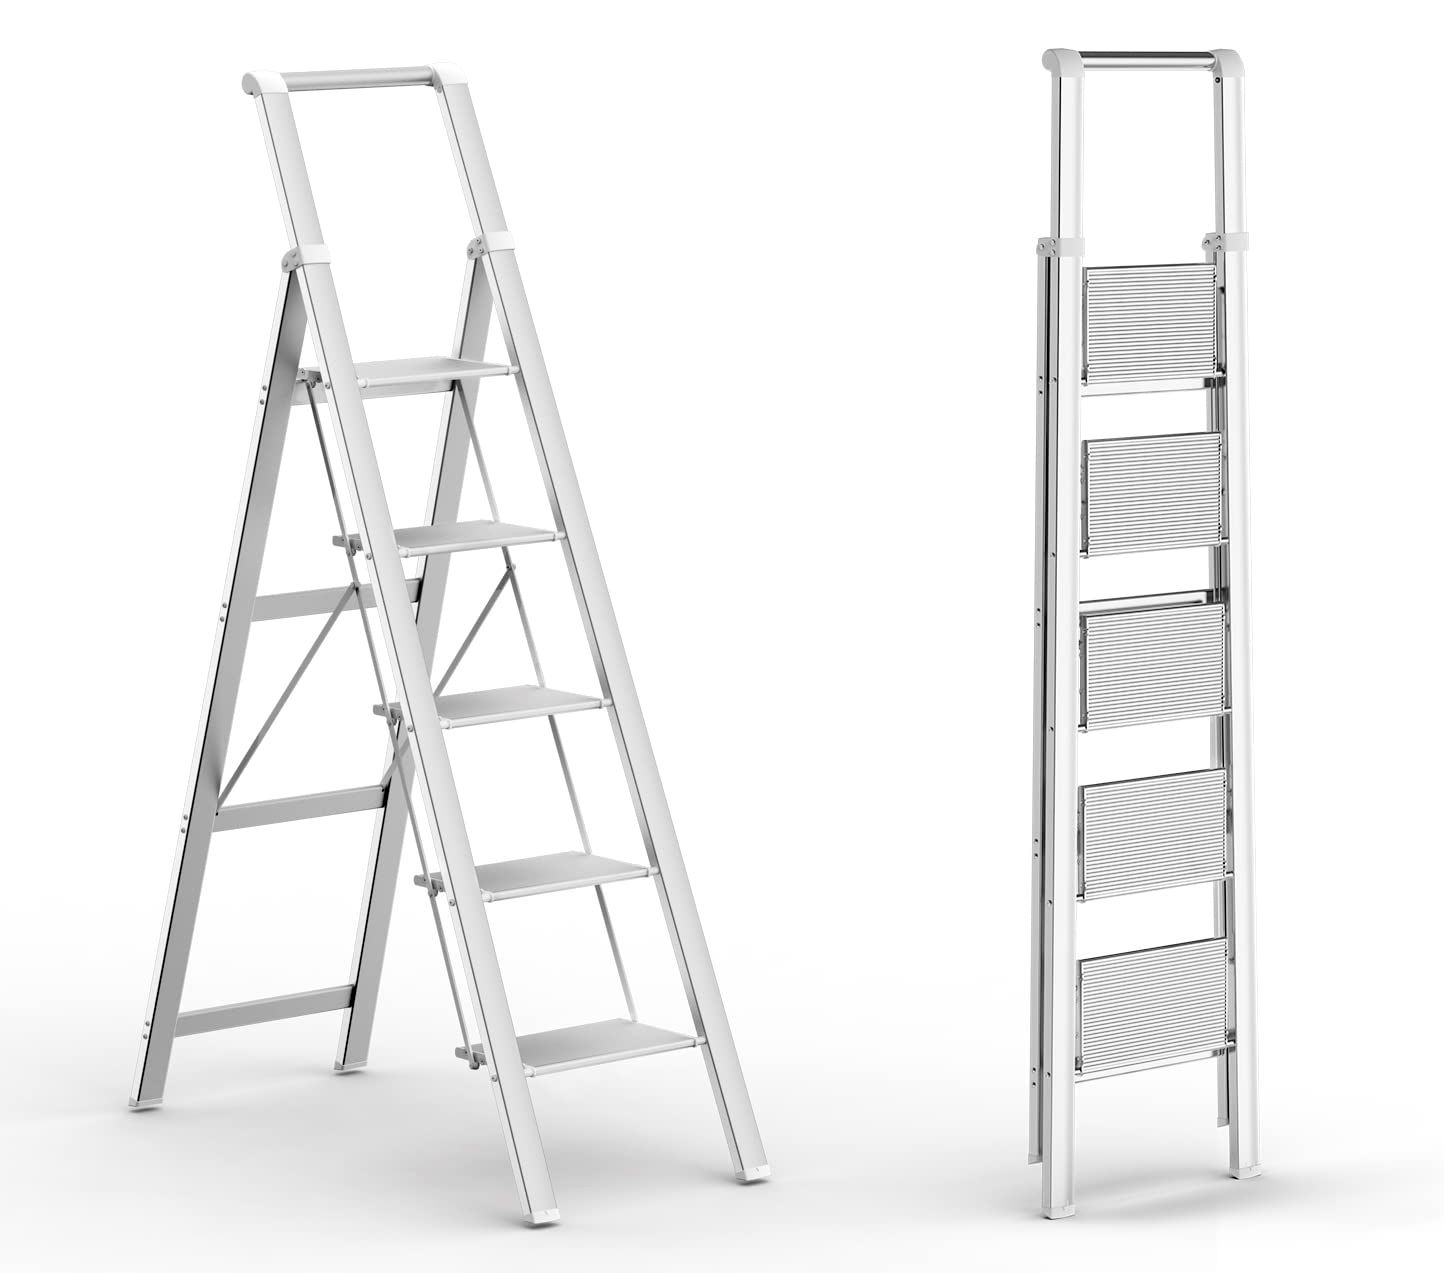 What Step Ladder Is Best Suited For 10 Foot Ceilings